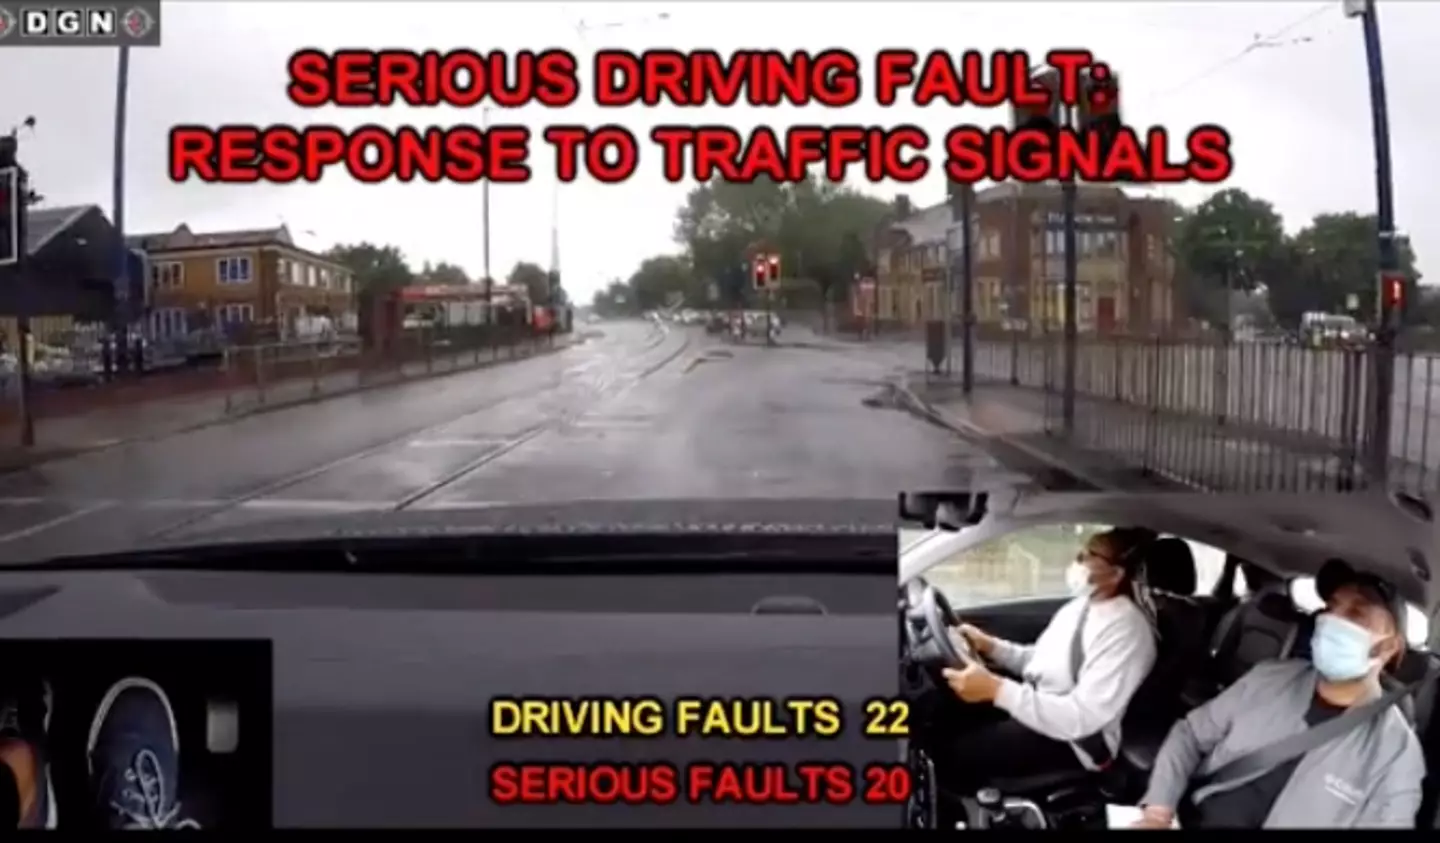 The learner is faced with two sets of traffic lights.